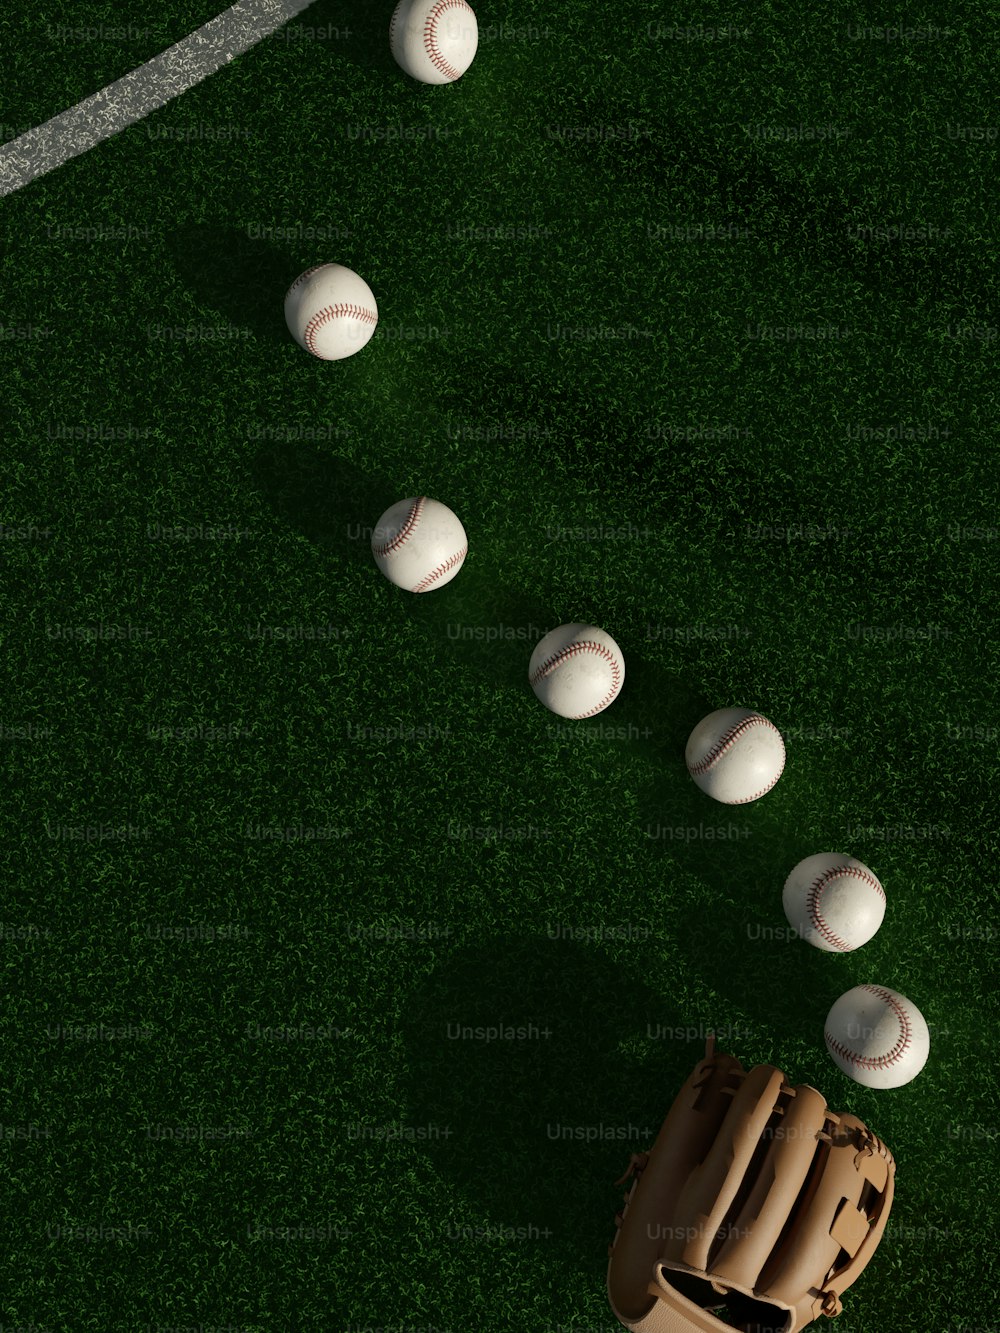 a group of baseballs sitting on top of a field